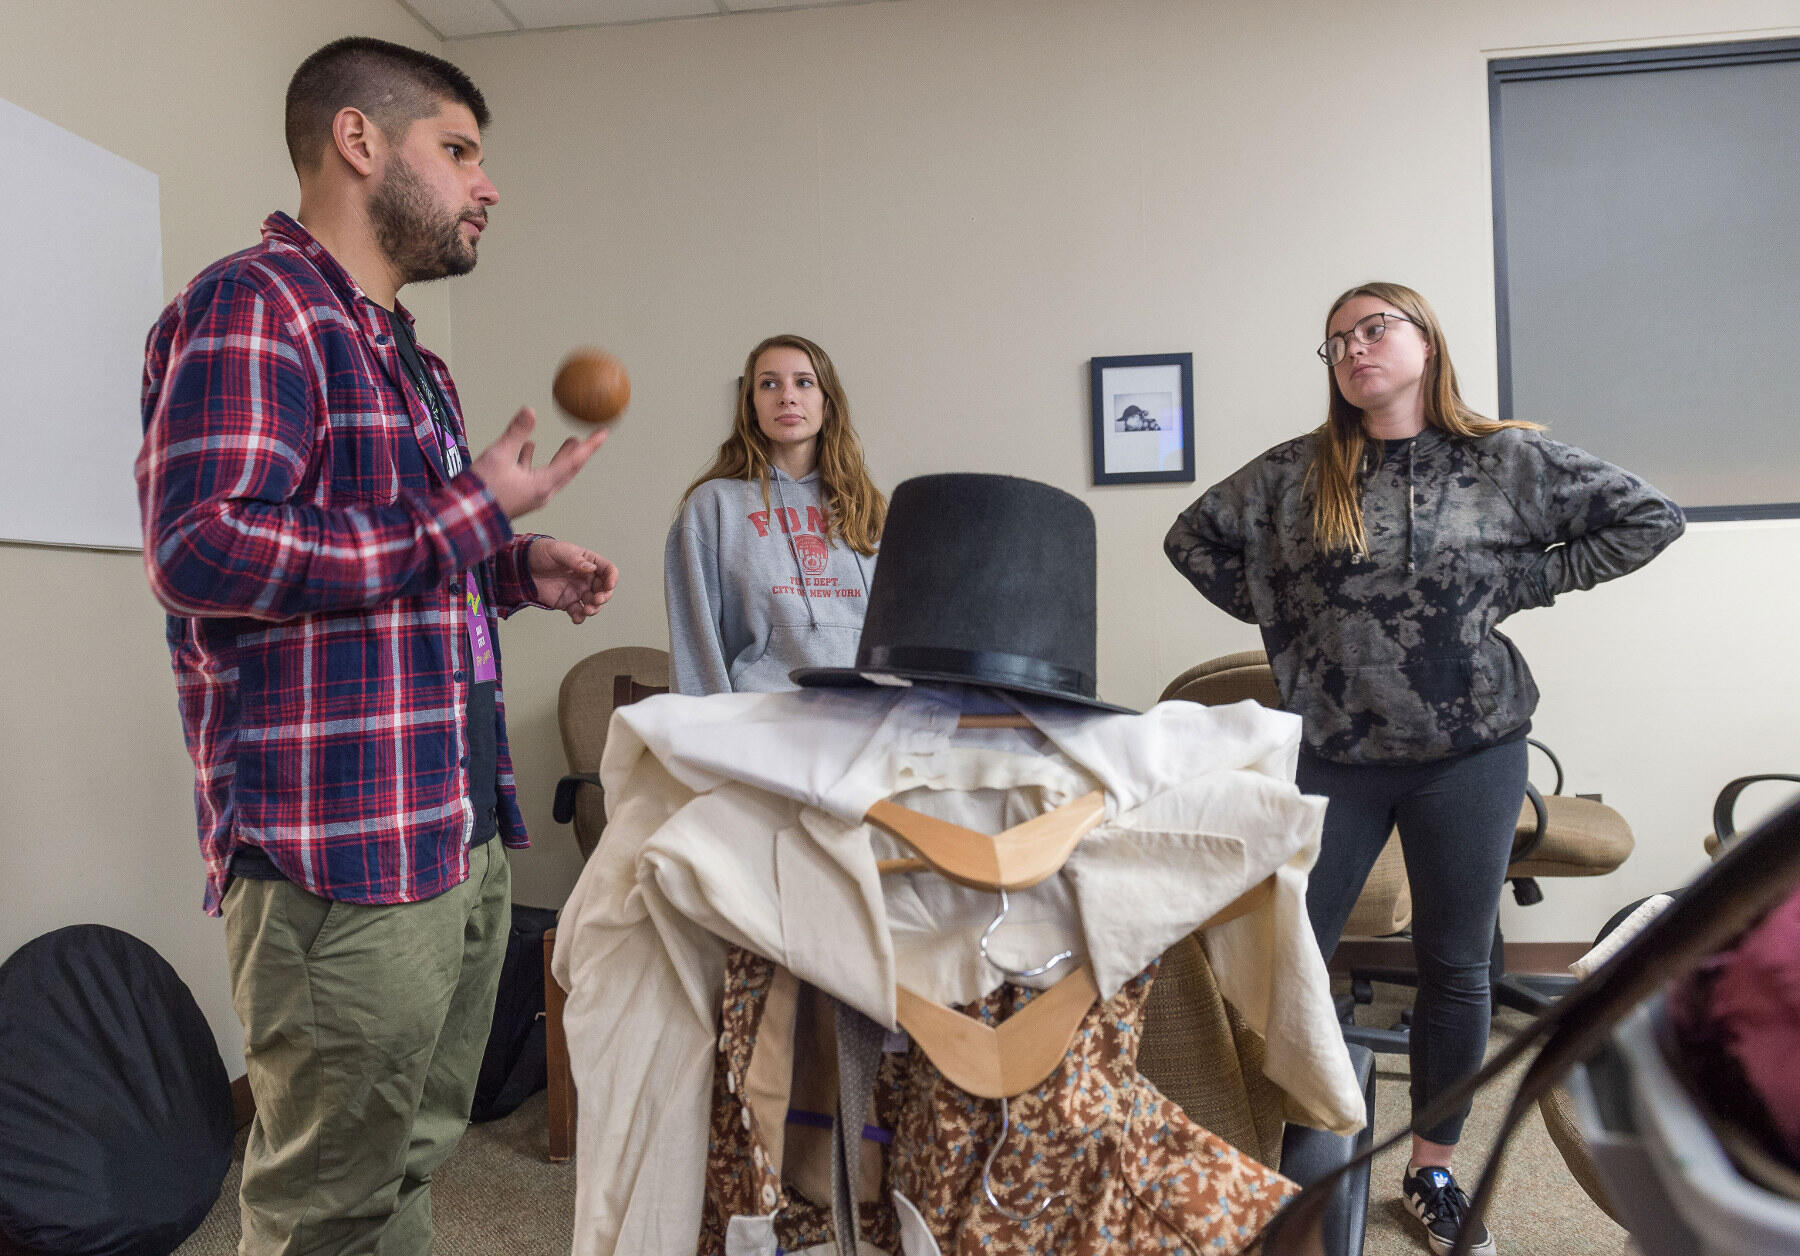 Students working on marketing materials for the American Civil War Museum borrowed props to create a short promotional video that tells a personal story from the Civil War that they felt would resonate with audiences today.